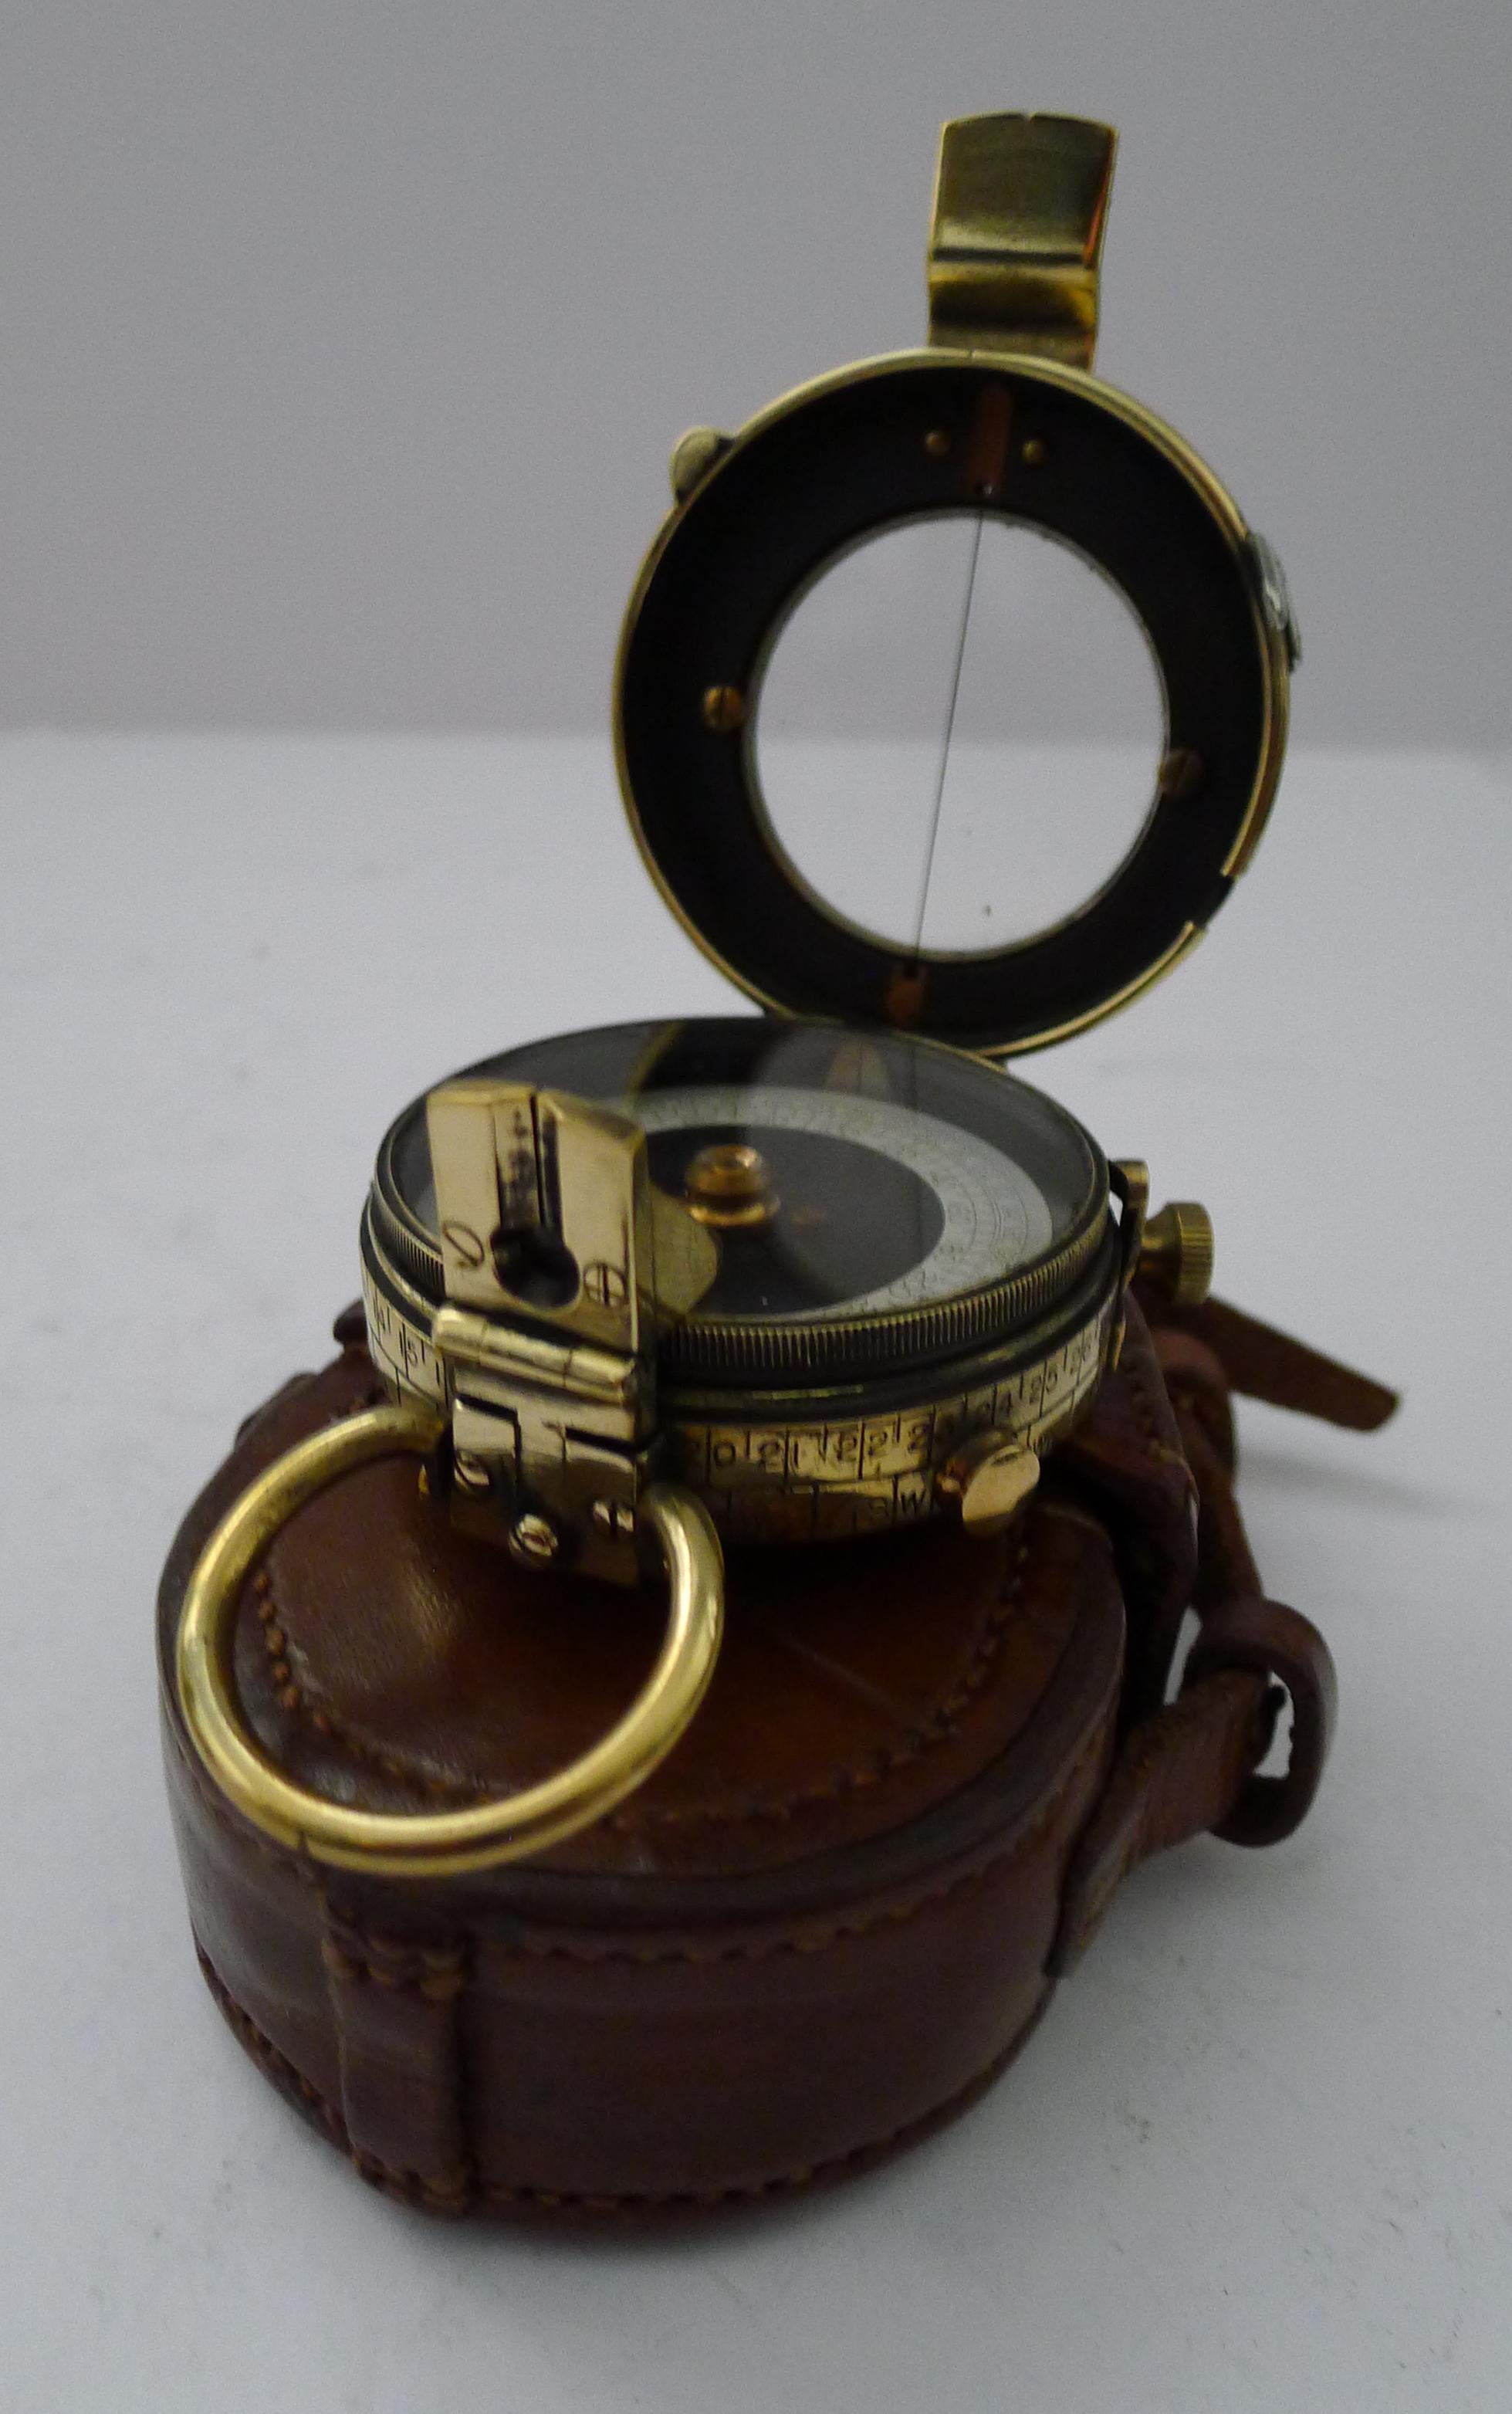 WW1 1918 British Army Officer's Compass - Verner's Patent MK VII by French Ltd. For Sale 7